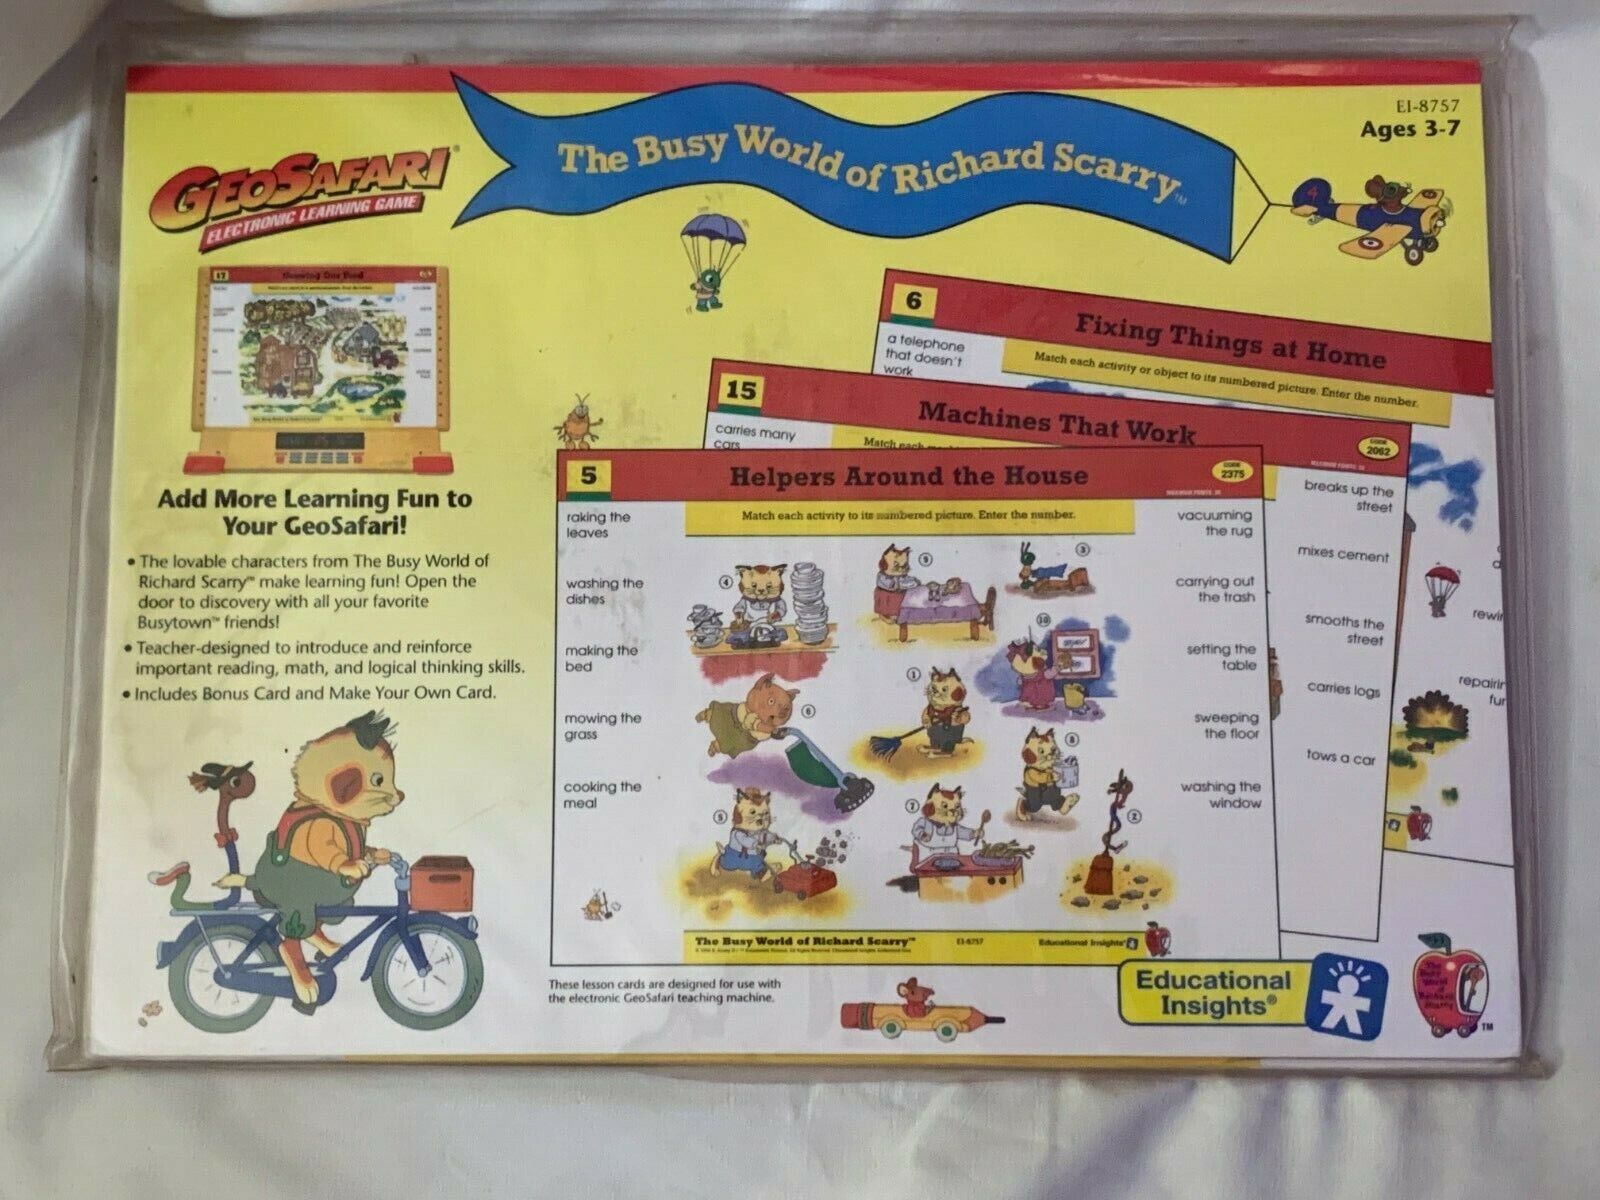 GeoSafari BUSY WORLD OF RICHARD SCARRY 10 double sided cards 20 Lessons EI-8757